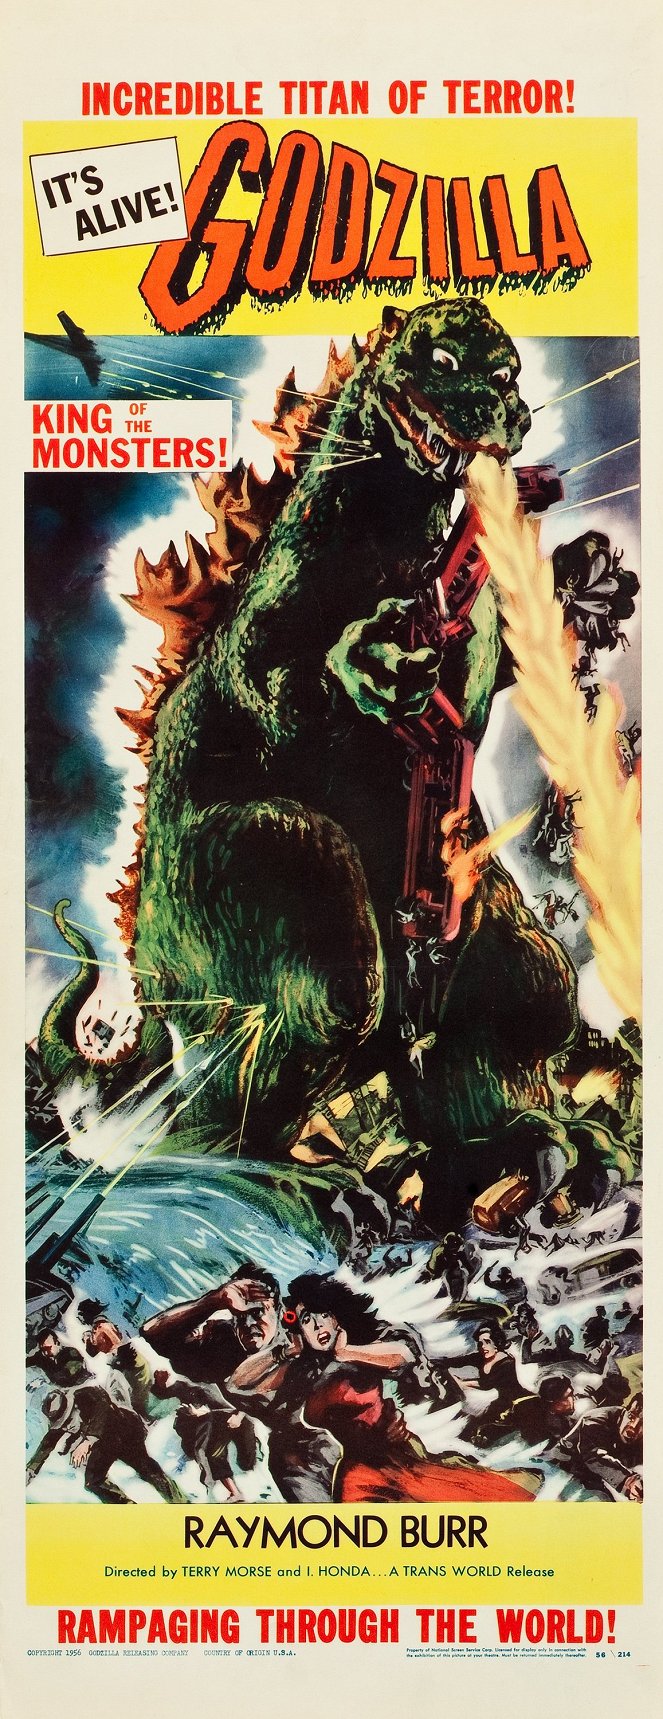 Godzilla, King of the Monsters! - Affiches